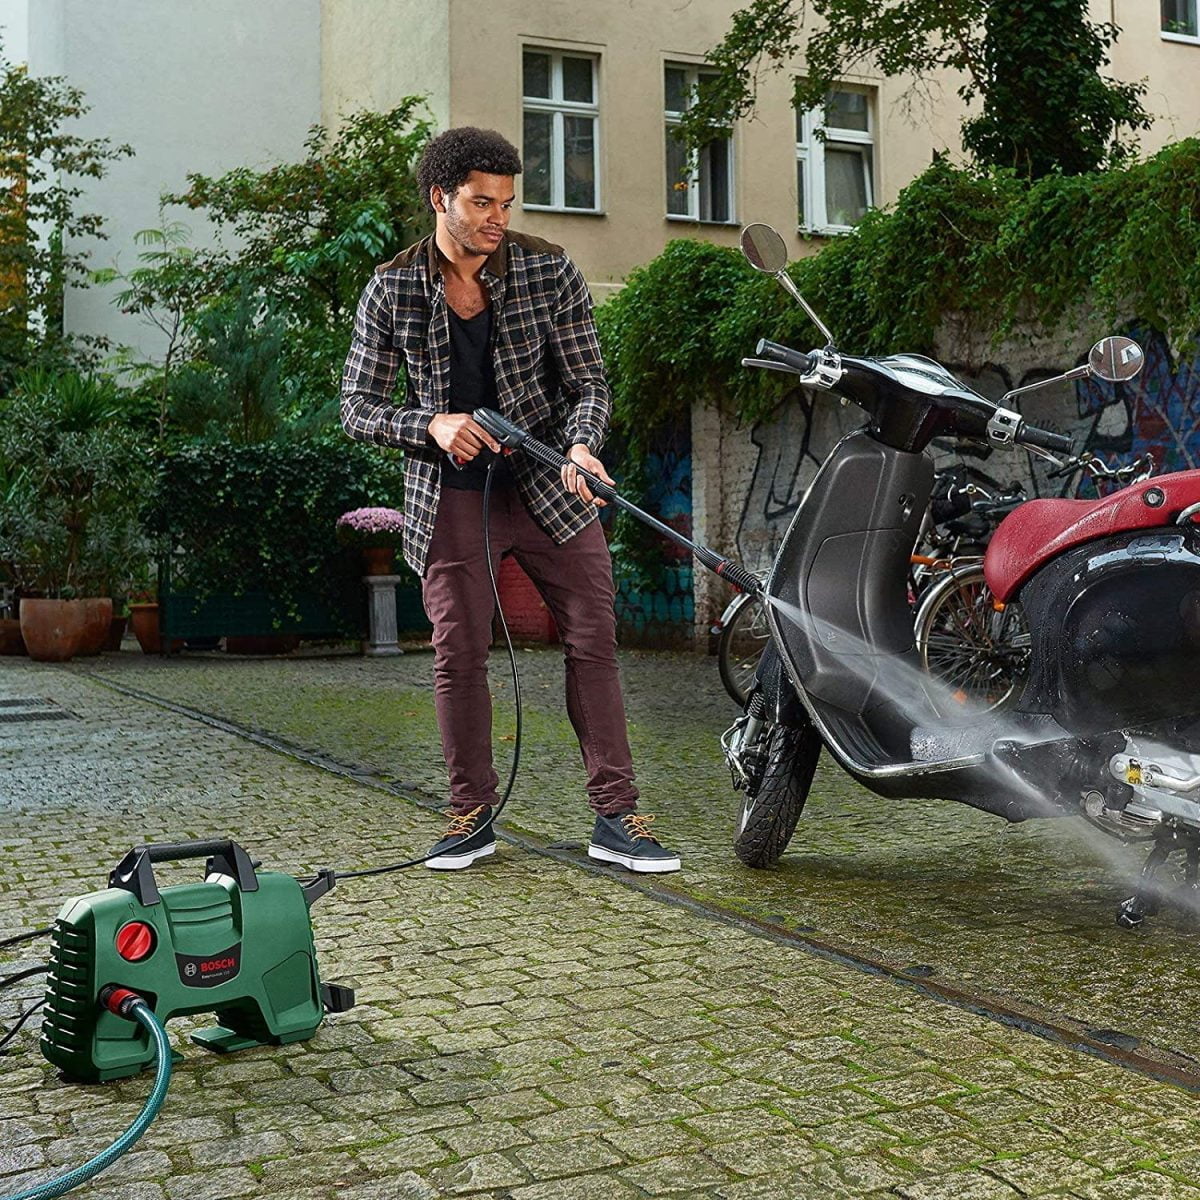 91Cseituivl. Ac Sl1500 Bosch &Lt;H1 Class=&Quot;Product-Title&Quot;&Gt;Bosch Easyaquatak 100 Long Lance Pressure Washer (1200 W) 100 Bar&Lt;/H1&Gt; &Lt;Div Class=&Quot;Col-Sm-6 Col-Md-12&Quot;&Gt; &Lt;Div Class=&Quot;O-Pthg-Productstage__Product-Summary H6&Quot;&Gt; &Lt;Div Class=&Quot;O-Pthg-Productstage__Product-Summary H6&Quot;&Gt;Compact And Quick For Effortless Cleaning Performance&Lt;/Div&Gt; &Lt;Ul Class=&Quot;A-List A-List--Unordered&Quot;&Gt; &Lt;Li Class=&Quot;A-List__Item&Quot;&Gt; &Lt;Div Class=&Quot;A-Text-Richtext&Quot;&Gt;Compact Design Allows Easy Maneuverability For Quick Cleaning Job&Lt;/Div&Gt;&Lt;/Li&Gt; &Lt;Li Class=&Quot;A-List__Item&Quot;&Gt; &Lt;Div Class=&Quot;A-Text-Richtext&Quot;&Gt;Adjustable Nozzle – From A Forceful Jet To Gentle Rinsing&Lt;/Div&Gt;&Lt;/Li&Gt; &Lt;Li Class=&Quot;A-List__Item&Quot;&Gt; &Lt;Div Class=&Quot;A-Text-Richtext&Quot;&Gt;Push-Fit Connections For Ultimate Convenience&Lt;/Div&Gt;&Lt;/Li&Gt; &Lt;Li Class=&Quot;A-List__Item&Quot;&Gt; &Lt;Div Class=&Quot;A-Text-Richtext&Quot;&Gt;Easily Tackle Small-To-Medium-Sized Cleaning Tasks&Lt;/Div&Gt;&Lt;/Li&Gt; &Lt;/Ul&Gt; Model 00600 8A7 E71 Is &Lt;/Div&Gt; &Lt;/Div&Gt; Bosch Easyaquatak 100 Long Lance Pressure Washer (1200 W) 100 Bar